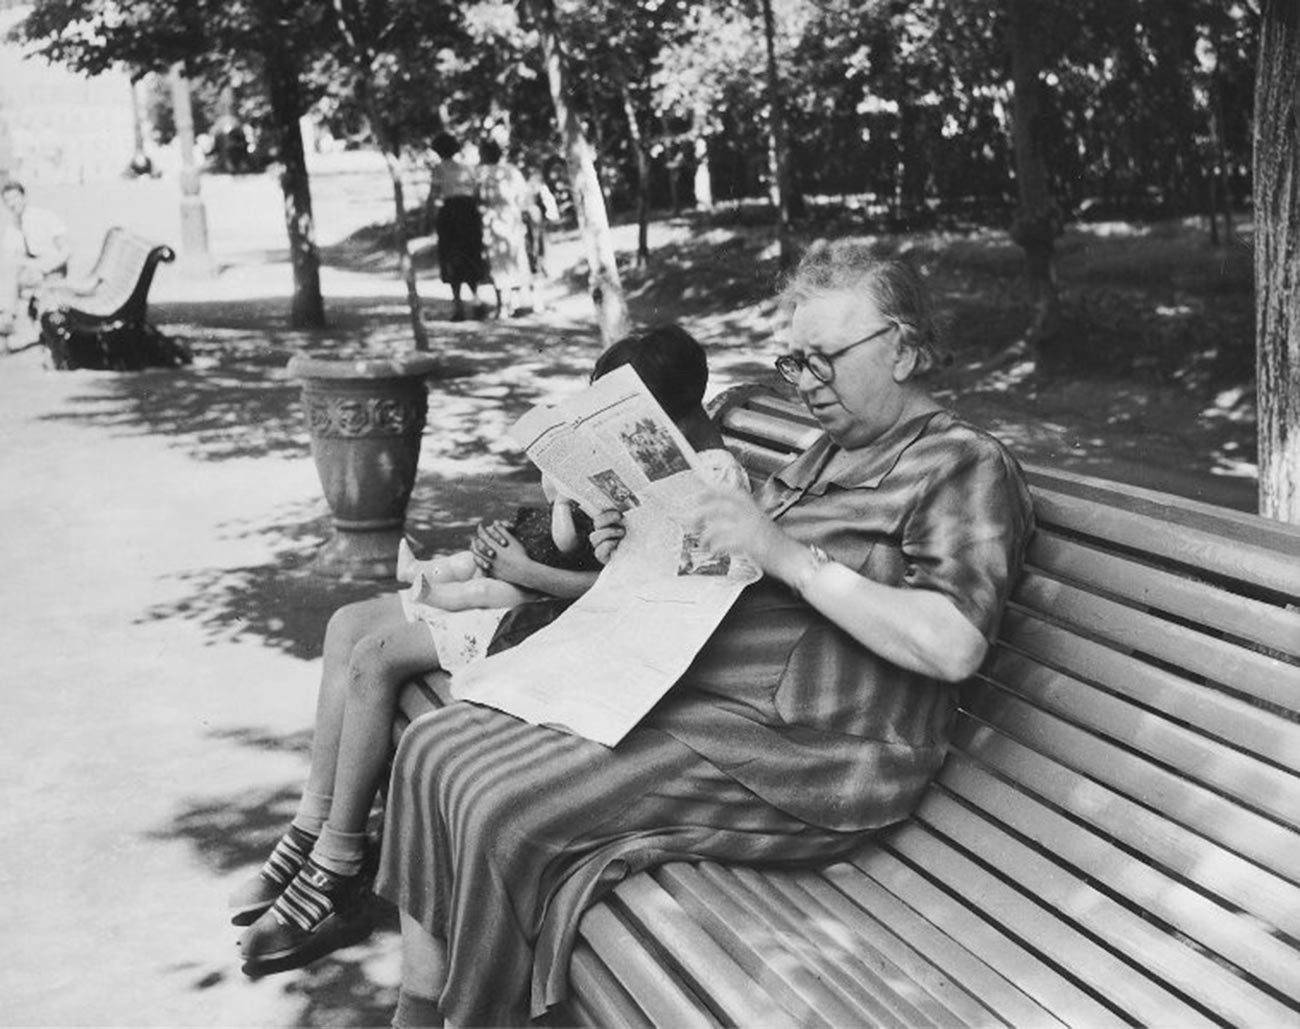 An old woman sitting on a bench, 1956